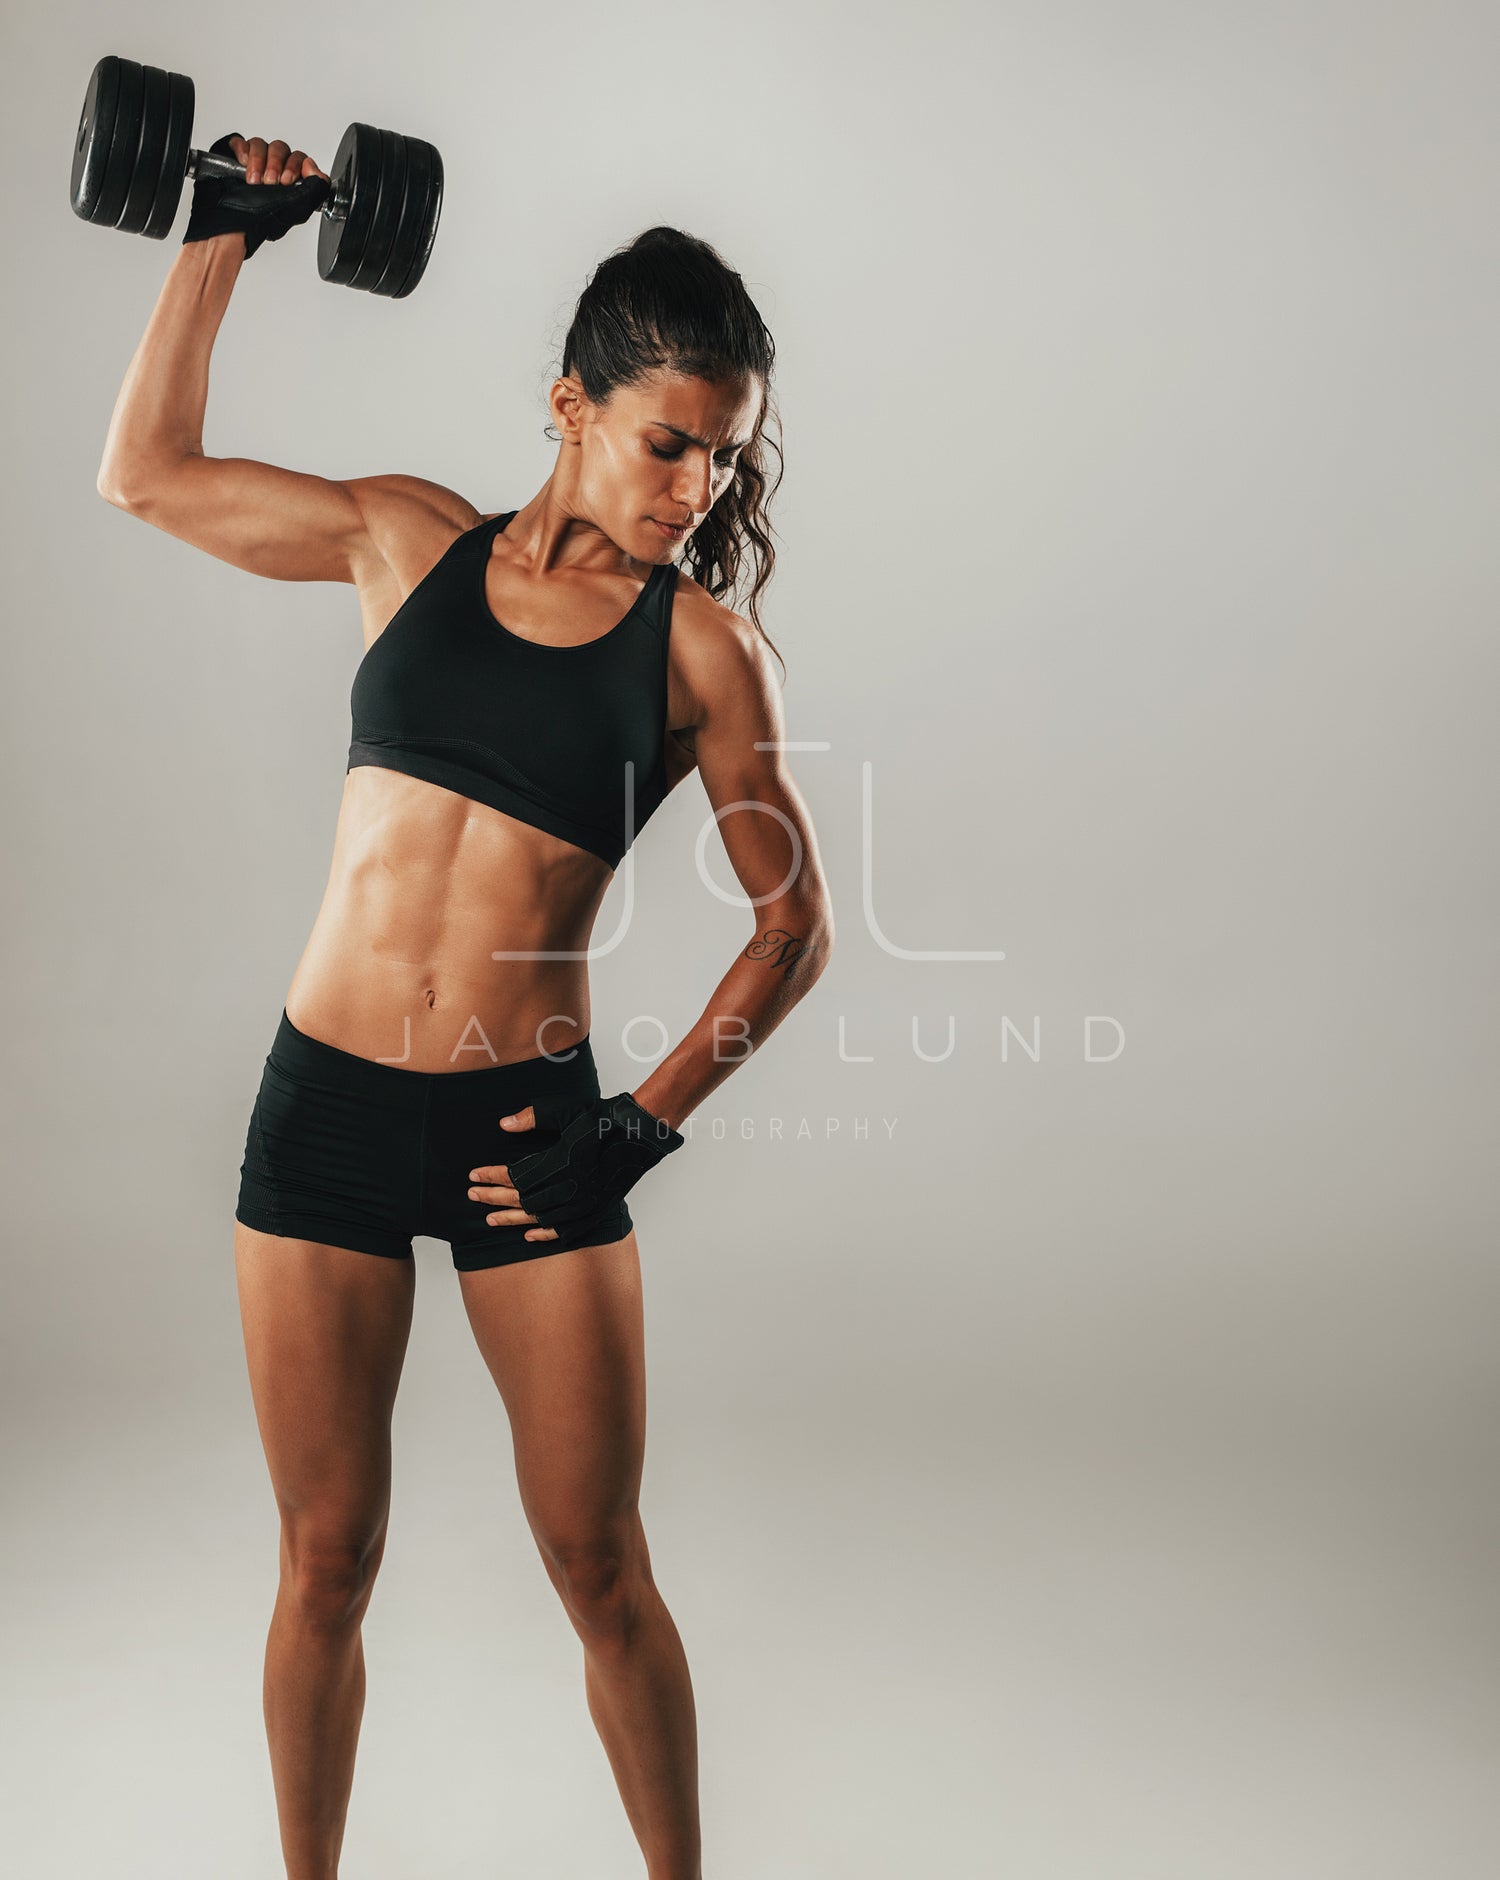 Fit strong young woman with a toned muscular body – Jacob Lund